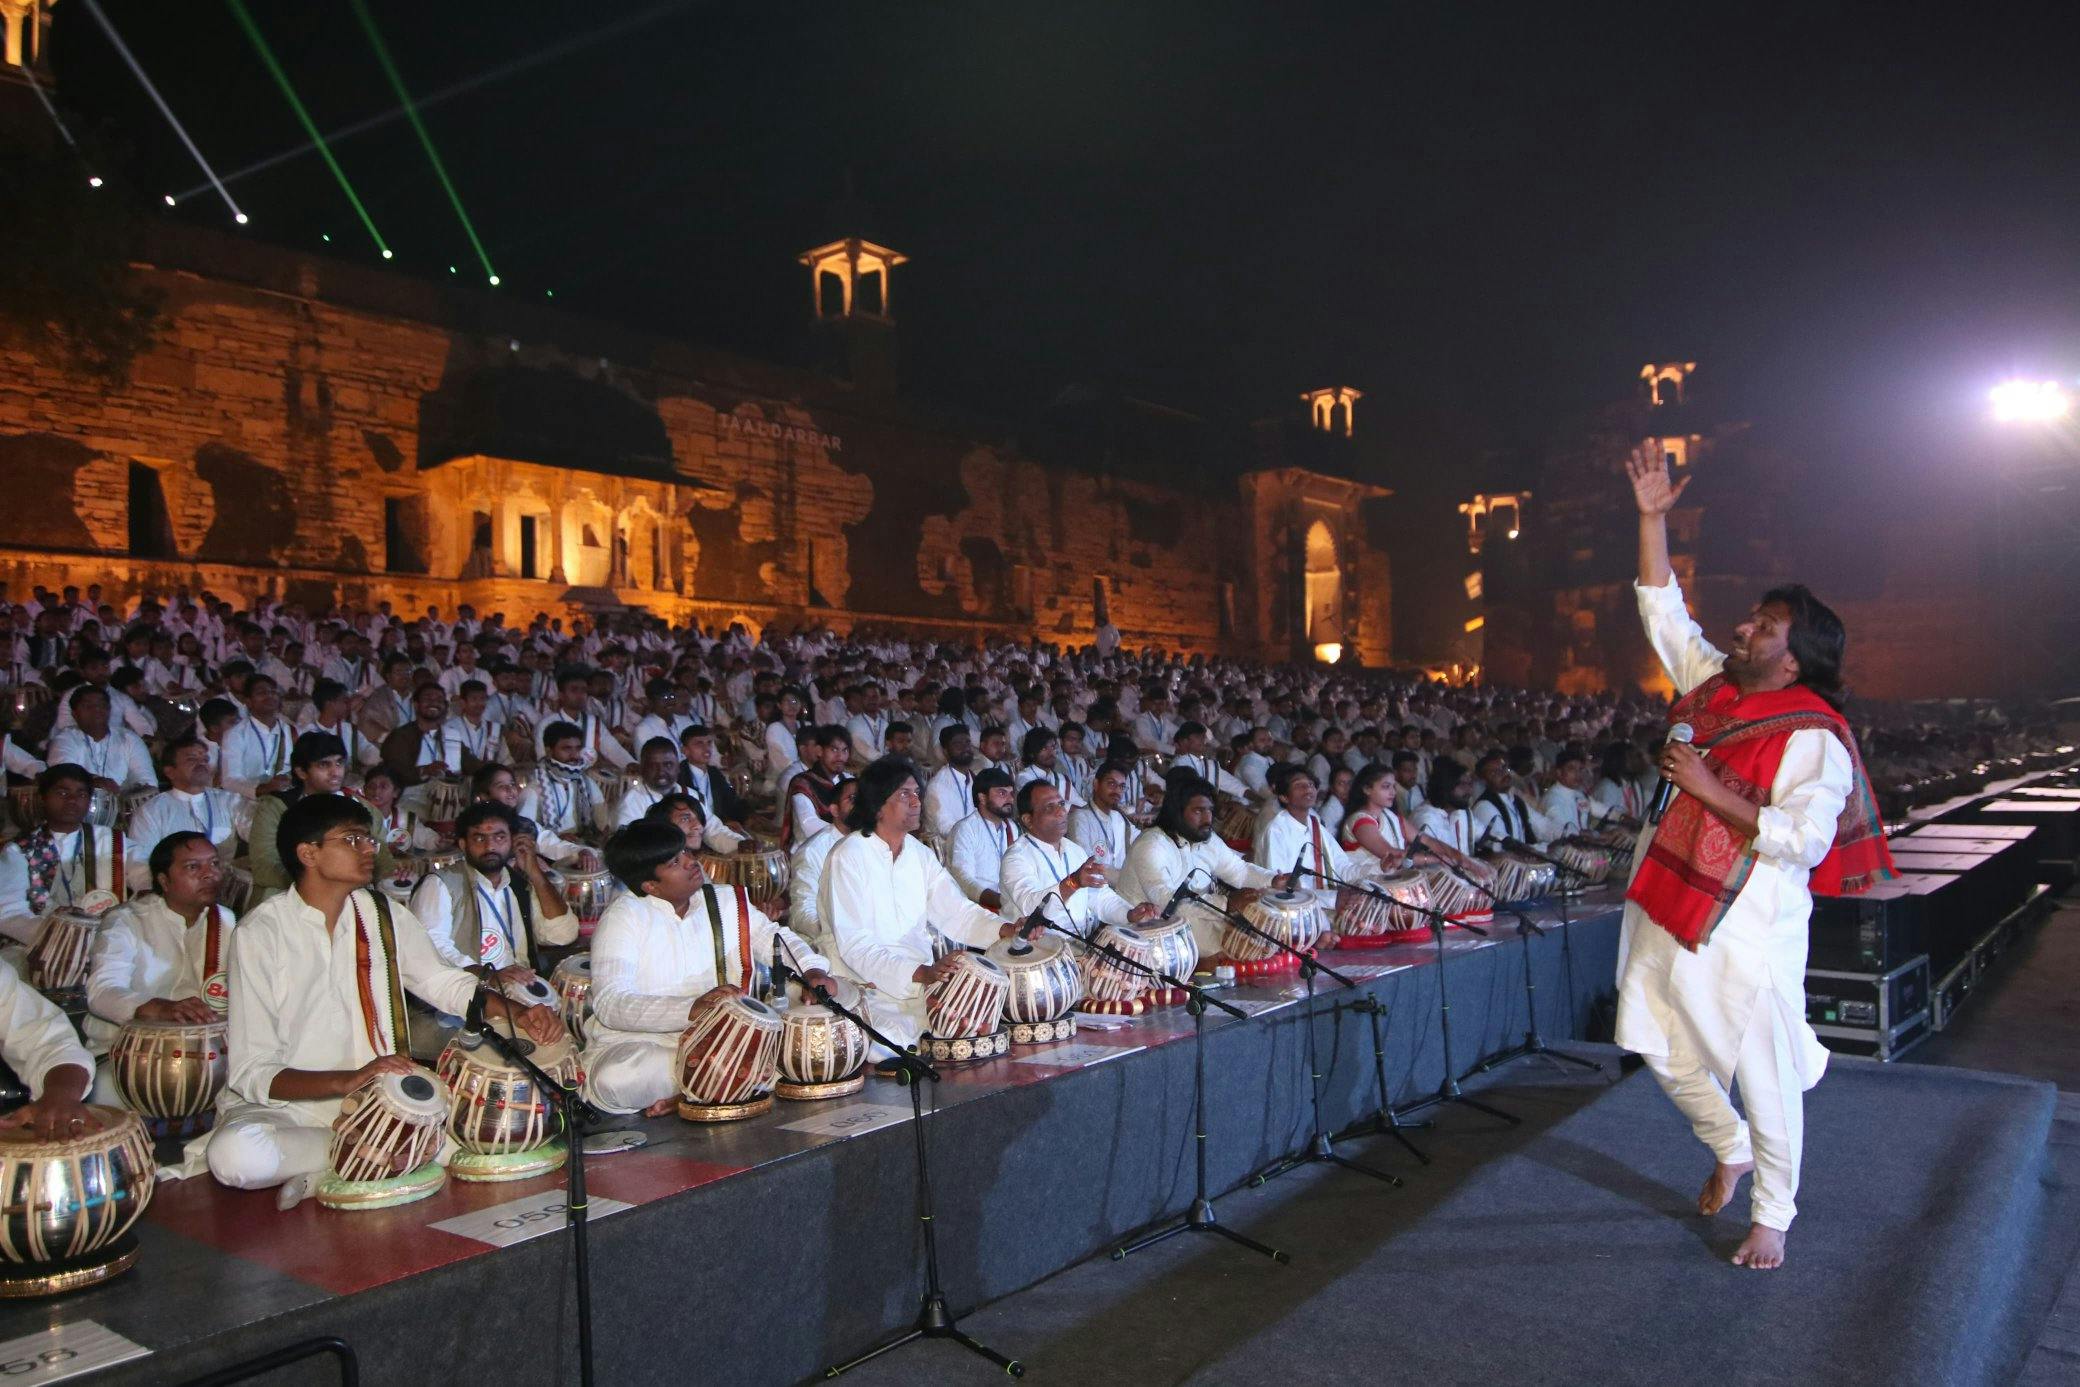 World Record for the Largest Tabla Ensemble